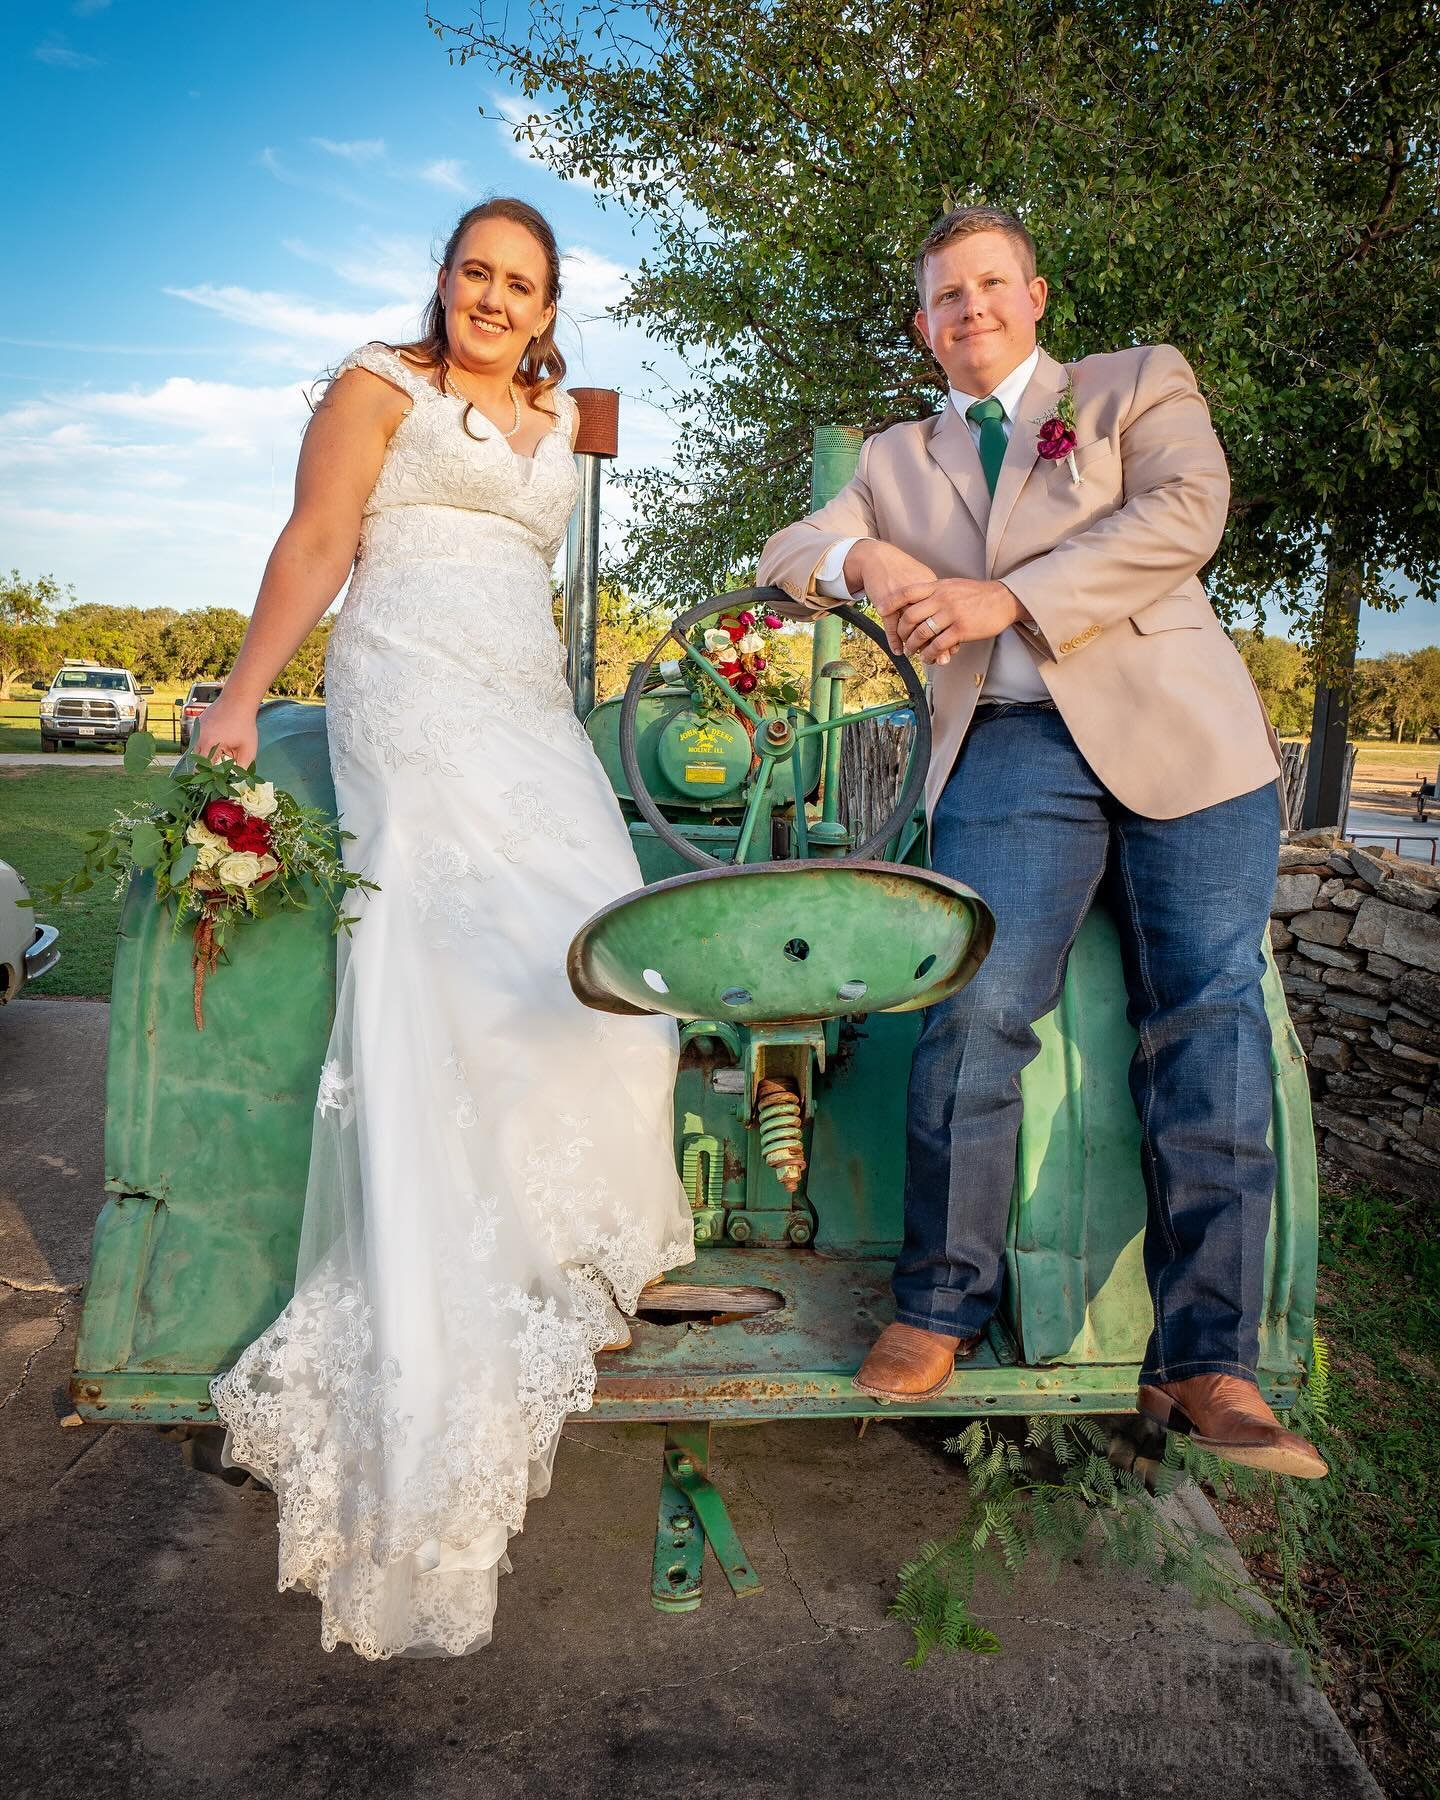 Dreaming of a wedding with a true Texas twist? Look no further than Dos Conchas Ranch in Marble Falls, TX. We specialize in Hill Country ranch weddings that blend rustic and elegant. From dance hall receptions, ceremonies under the towering oaks, or 